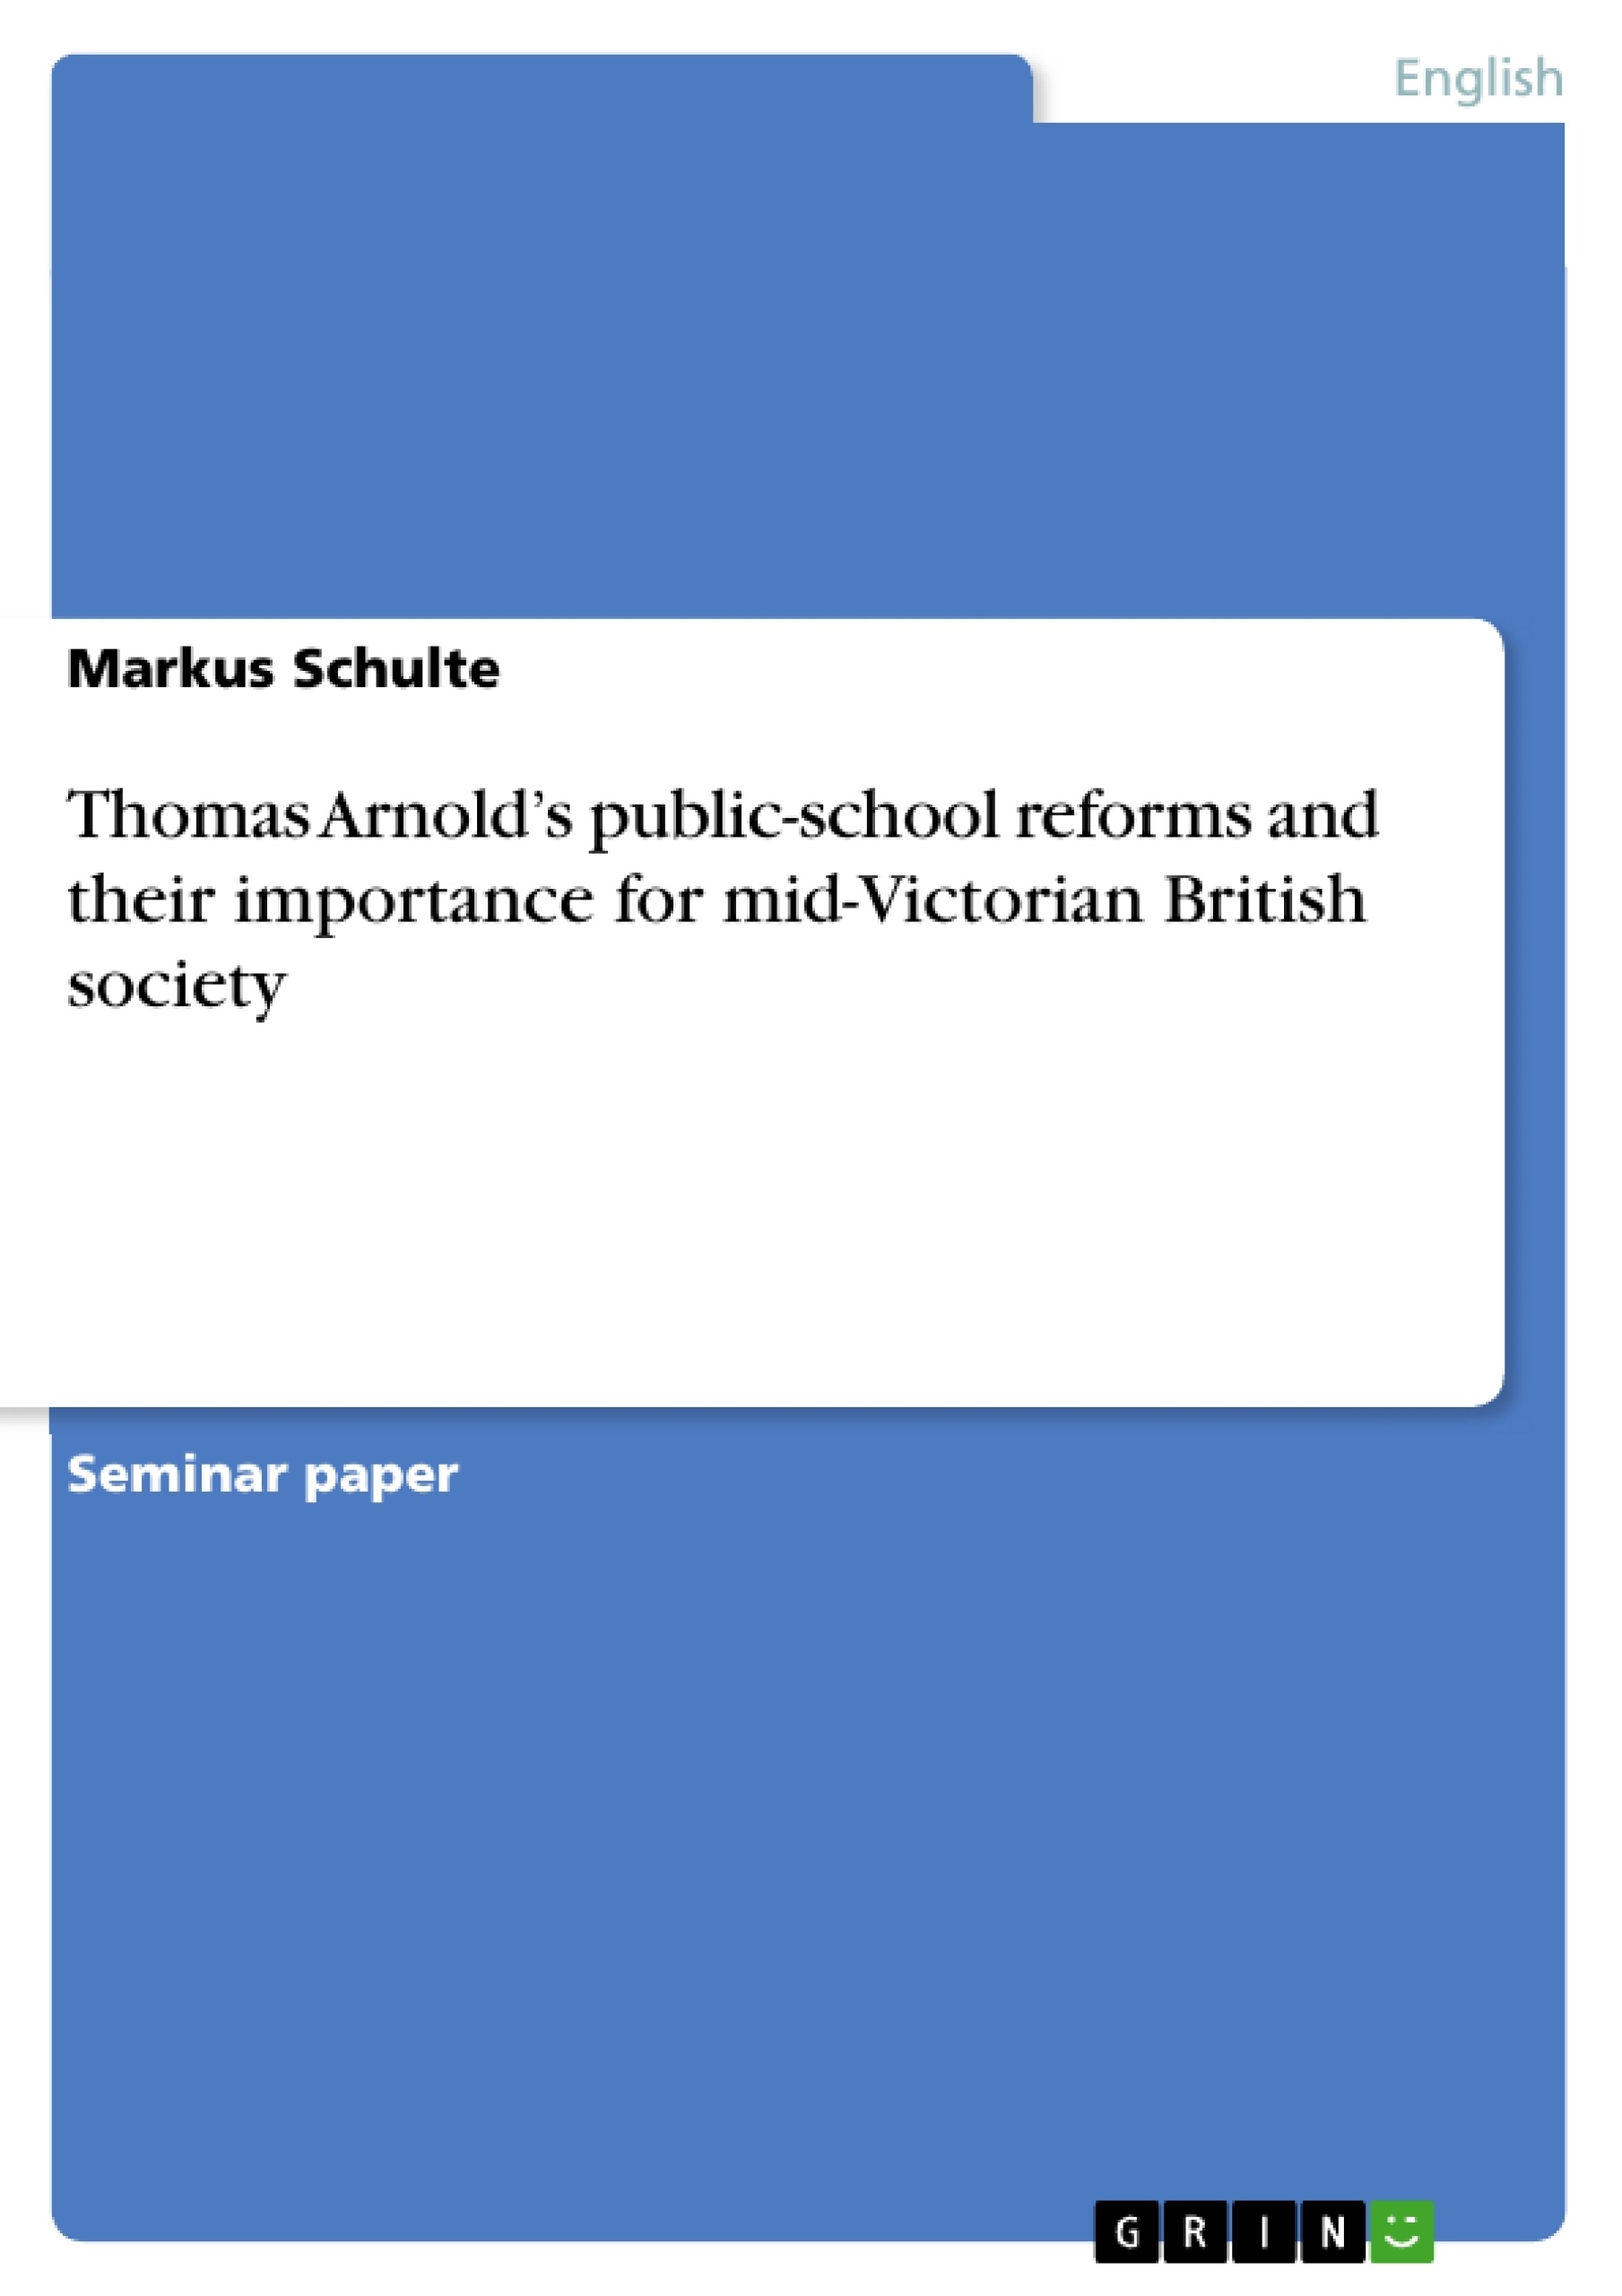 Título: Thomas Arnold’s public-school reforms and their importance for mid-Victorian British society